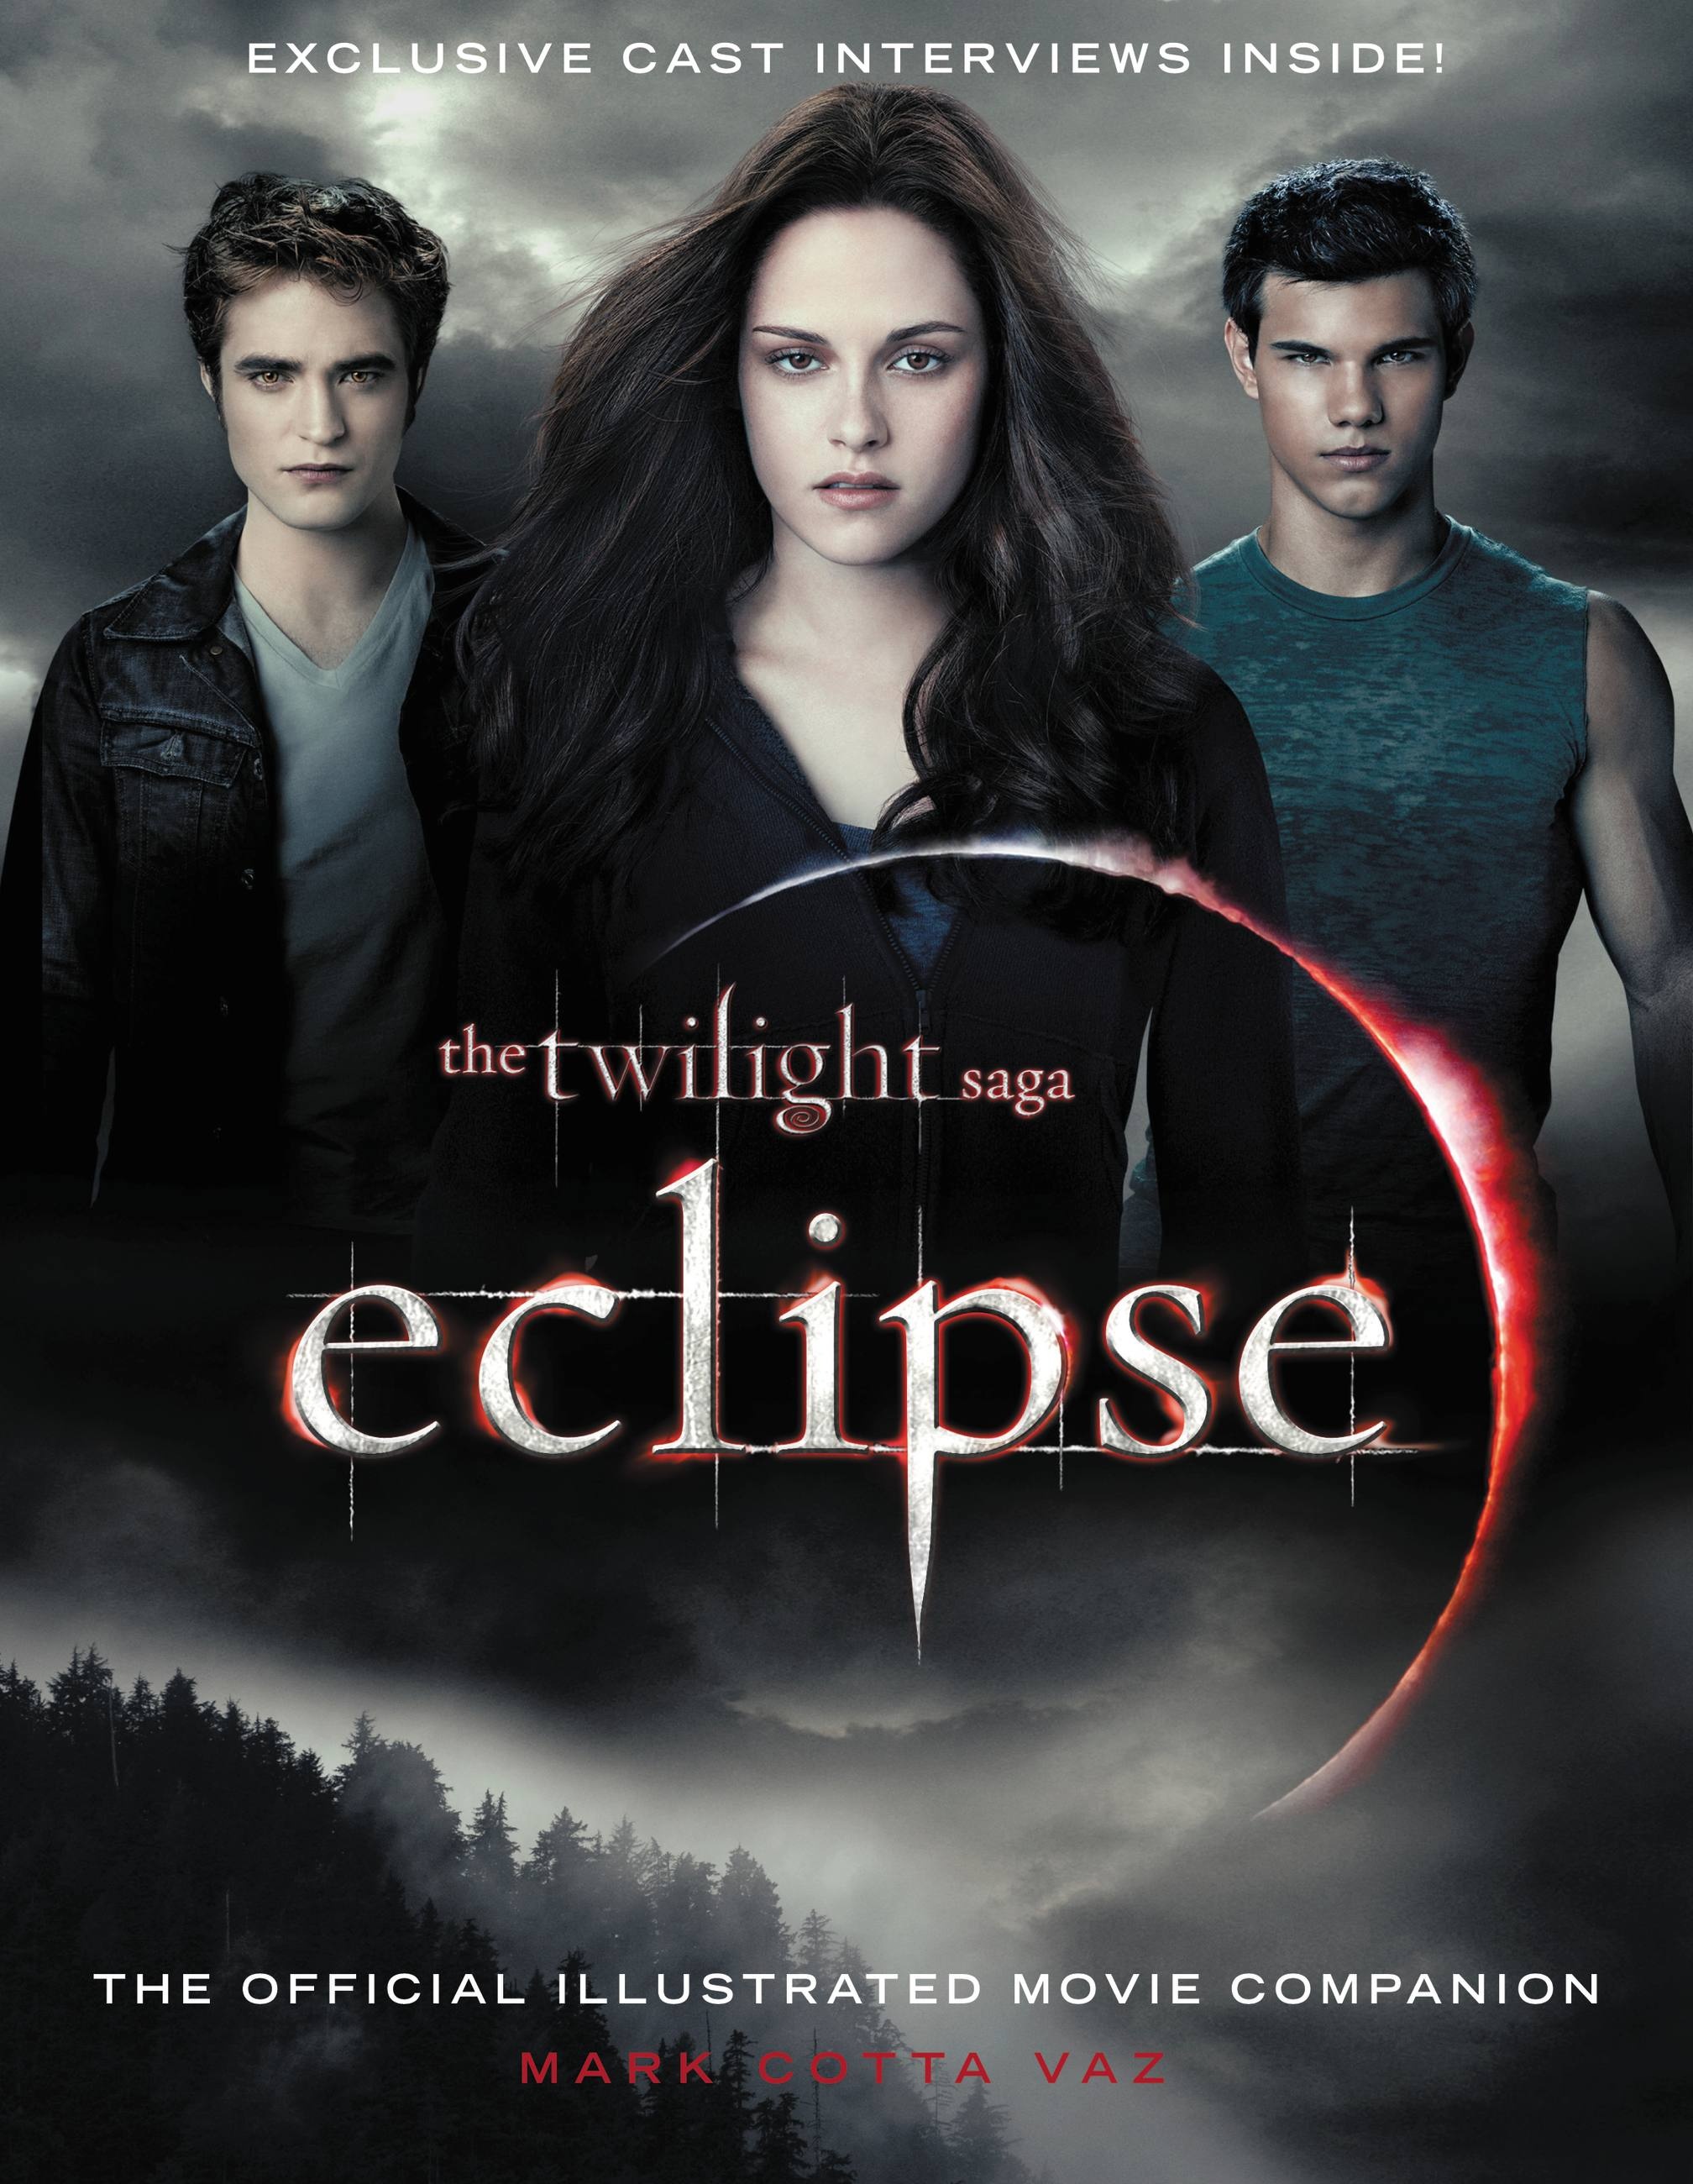 The Twilight Saga Eclipse: The Official Illustrated Movie Companion by Mark  Cotta Vaz | Hachette Book Group